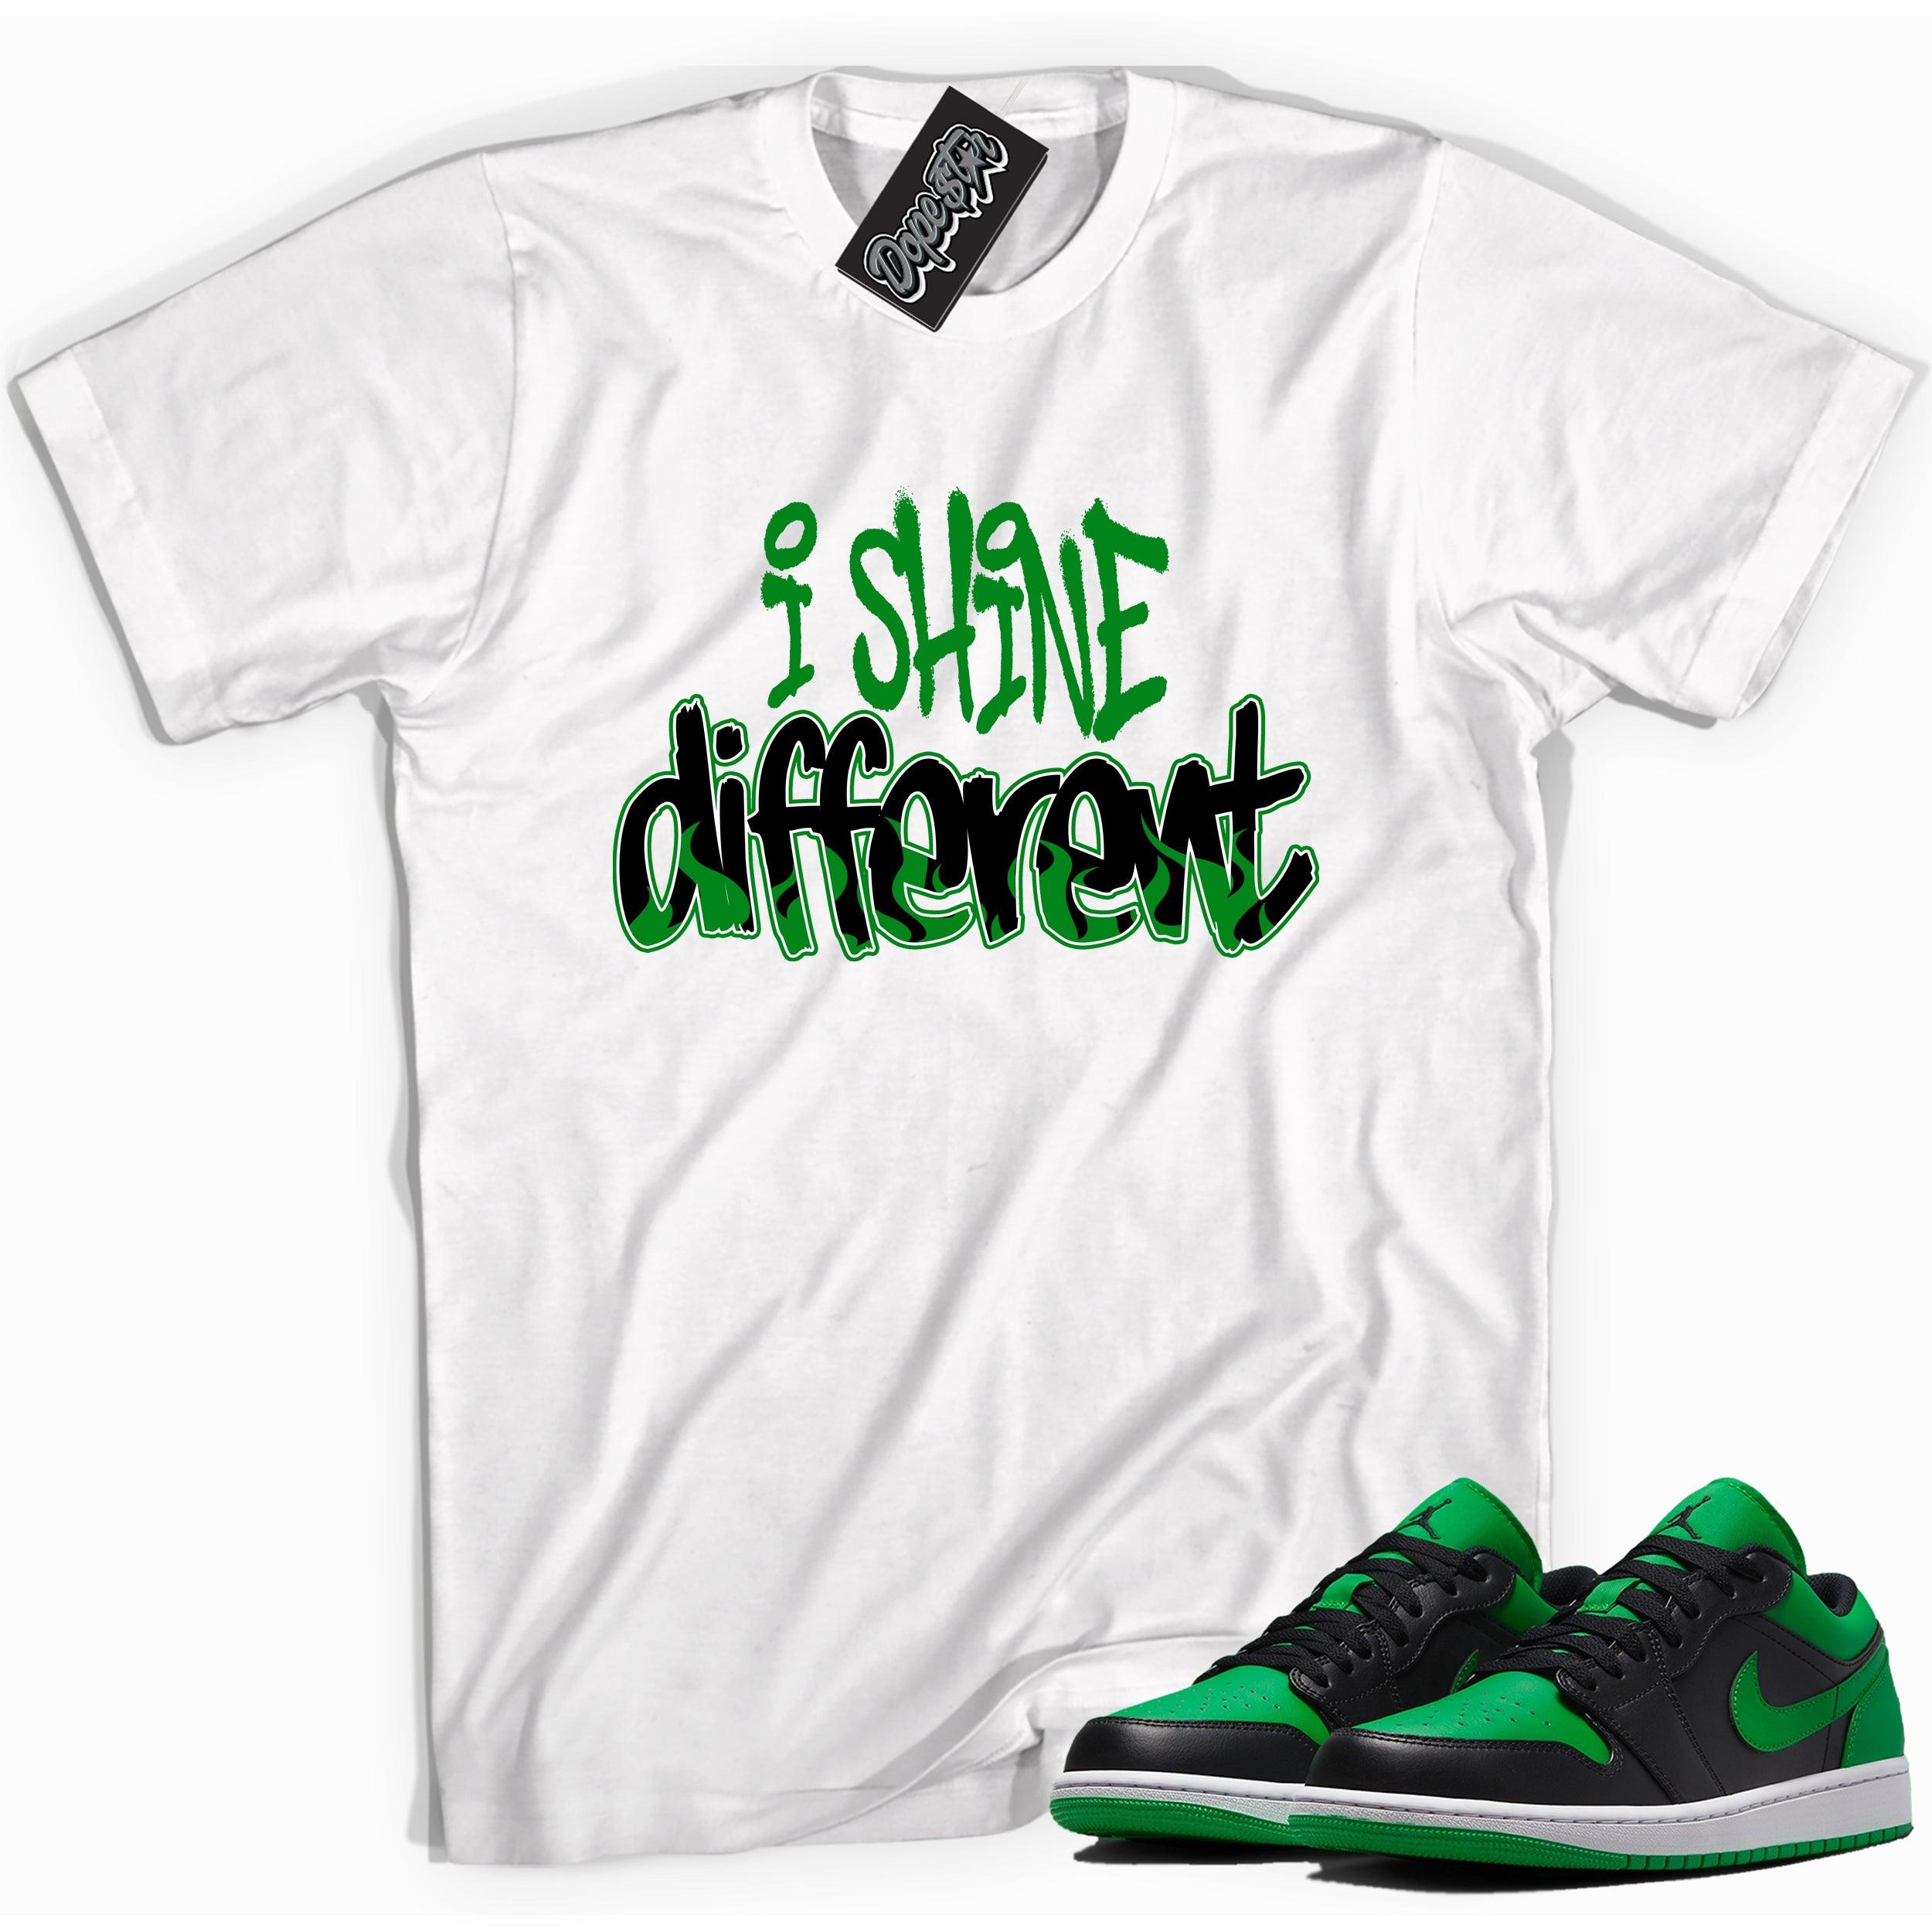 Cool white graphic tee with 'Shine Different' print, that perfectly matches Air Jordan 1 Low Lucky Green sneakers